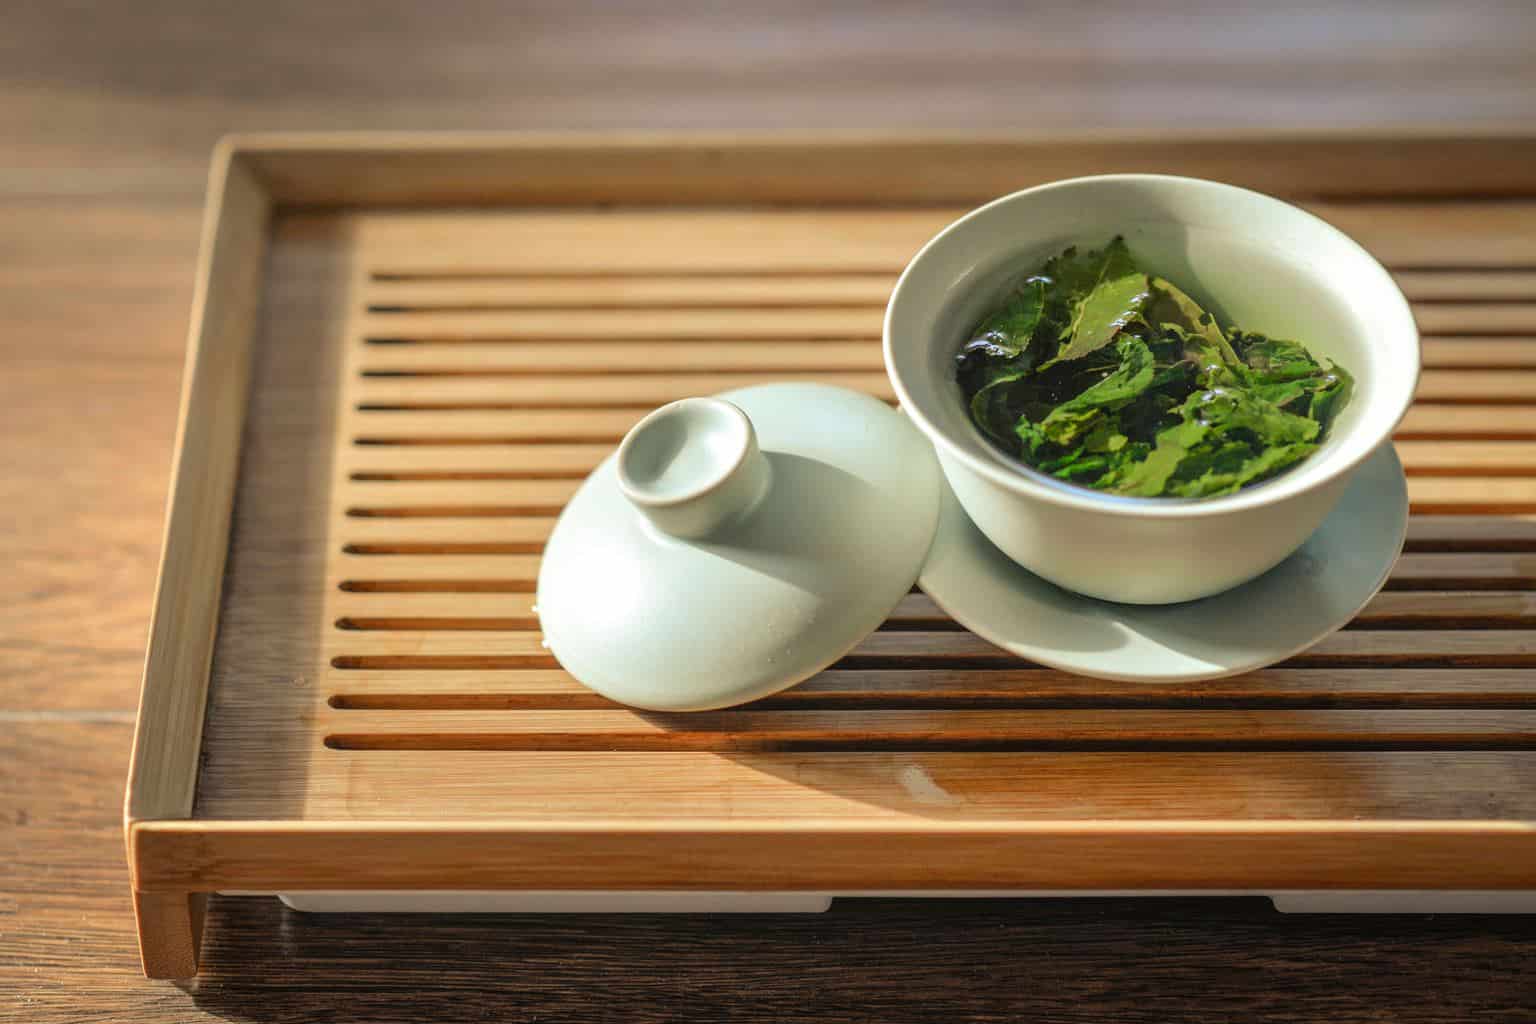 one of weight loss drink: green tea leaves in white ceramic bowl with open lid